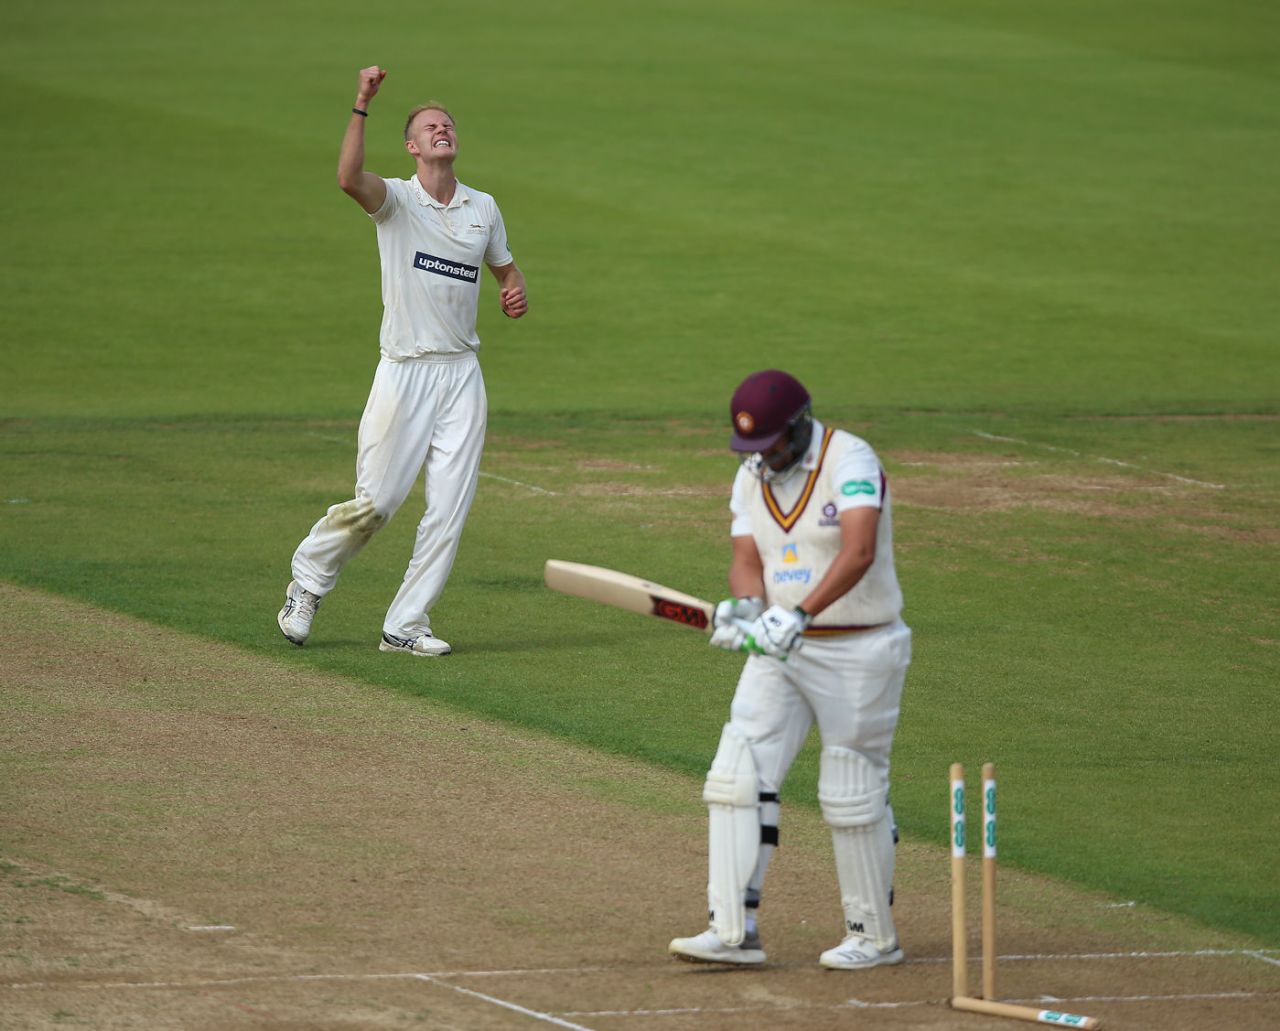 Zak Chappell celebrates his maiden five-wicket haul, Northants v Leicestershire, Specsavers Championship Division Two, Northampton, June 9, 2018